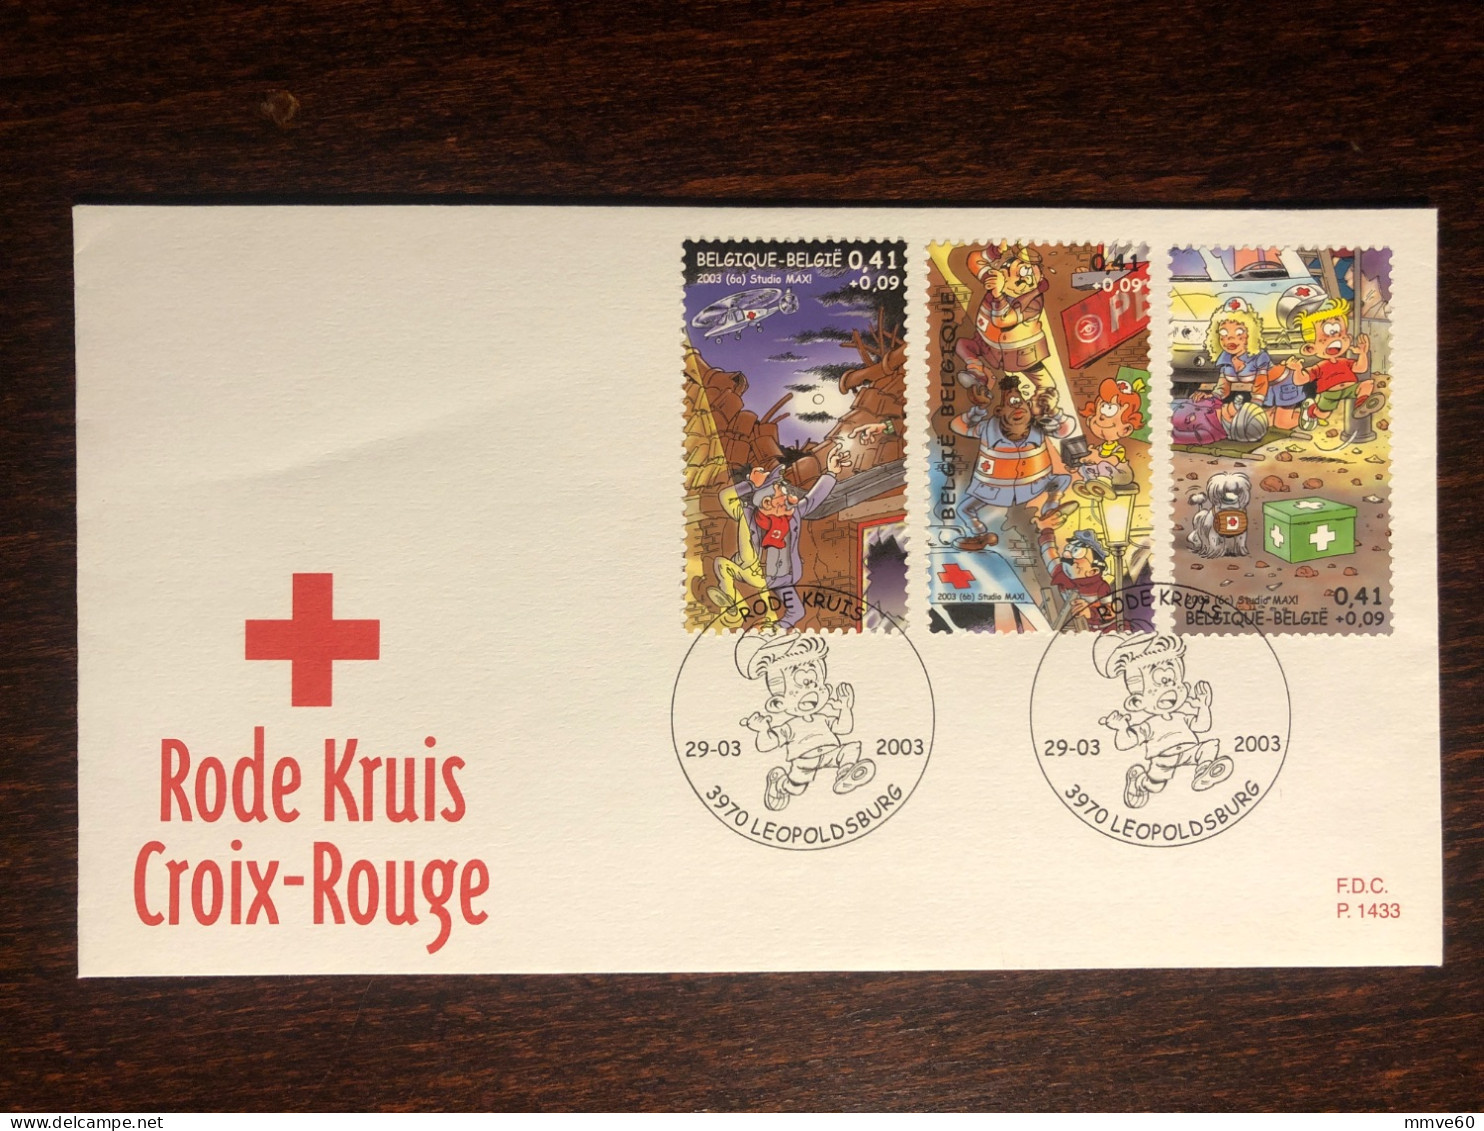 BELGIUM FDC COVER 2003 YEAR RED CROSS HEALTH MEDICINE STAMPS - Storia Postale